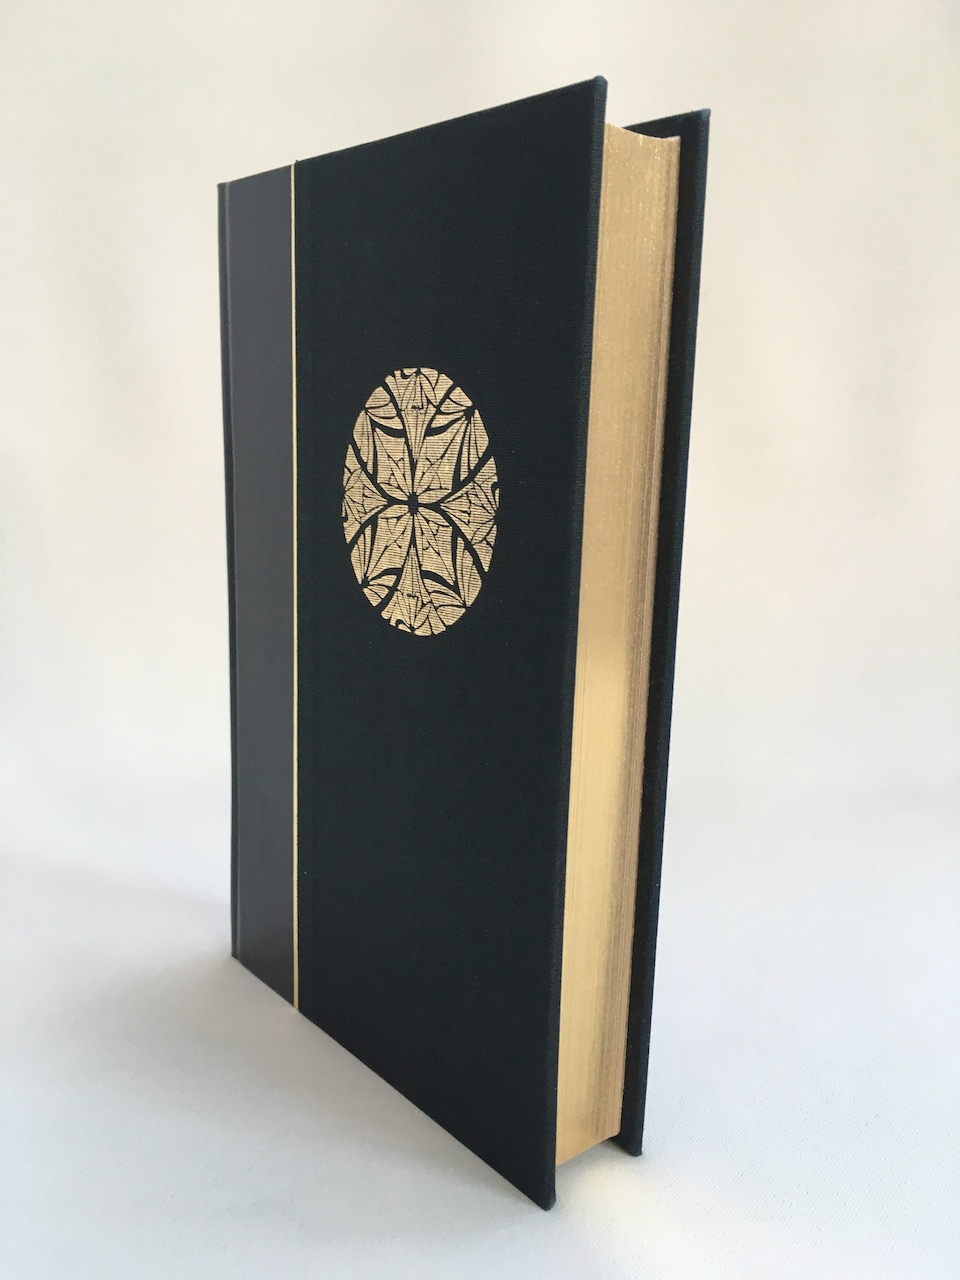 
Black Limited De Luxe edition of the Silmarillion 2002 12